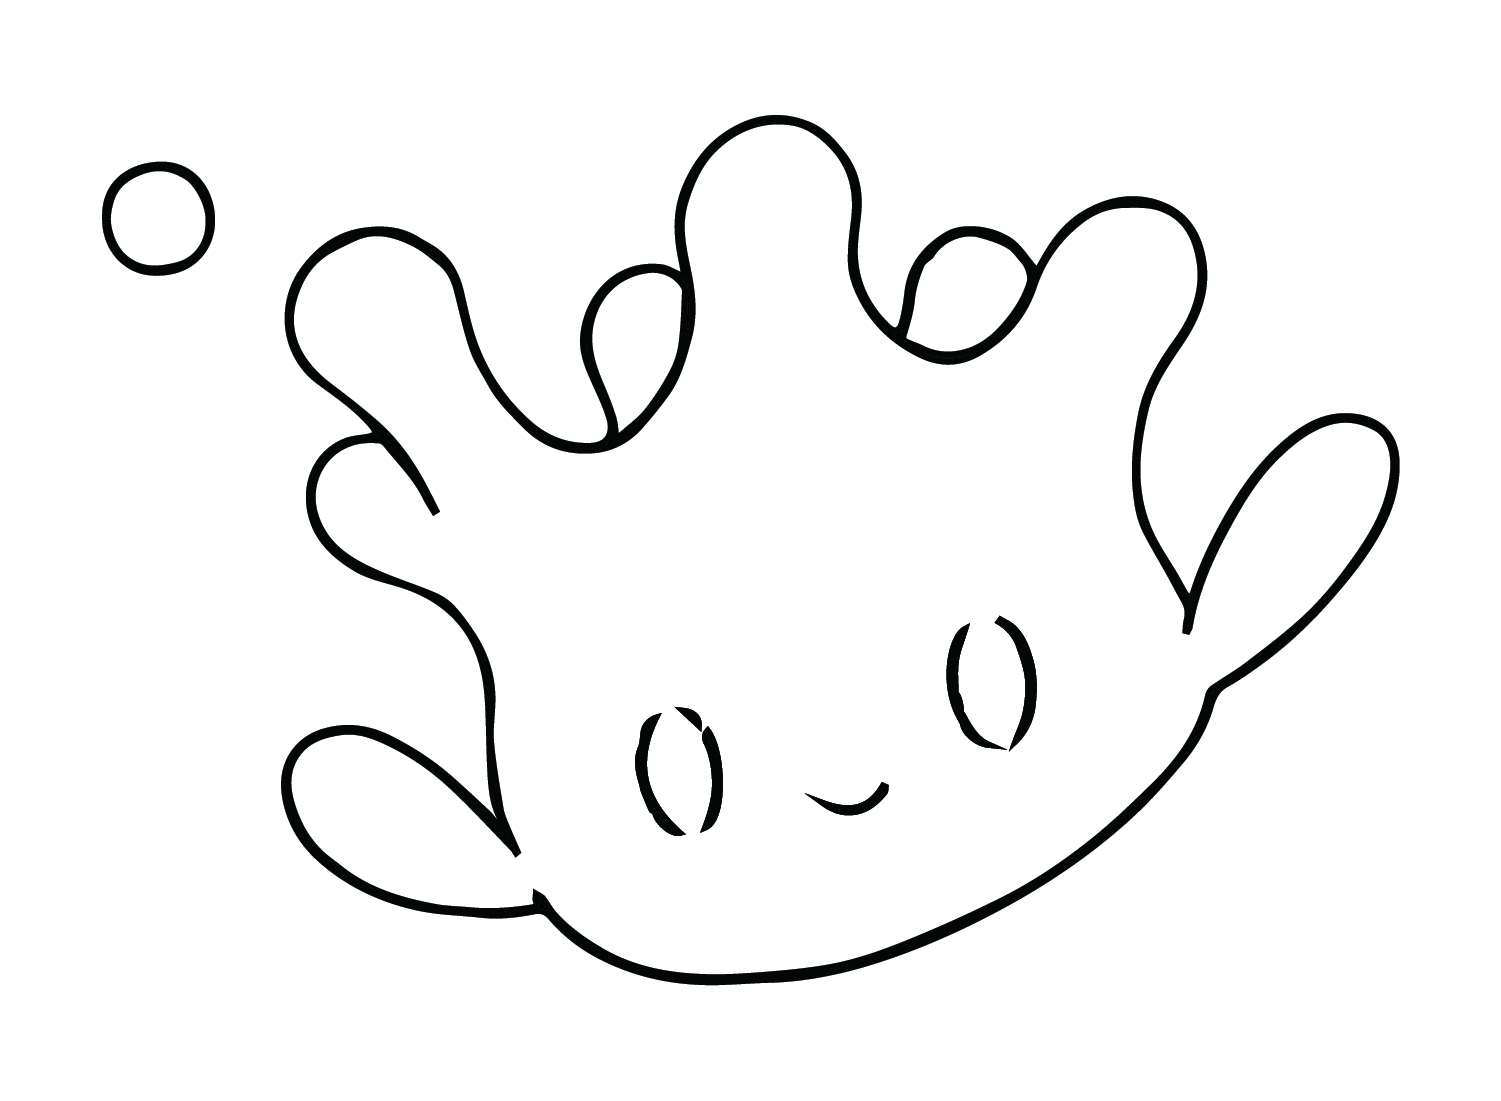 The Pokemon Milcery Coloring Page